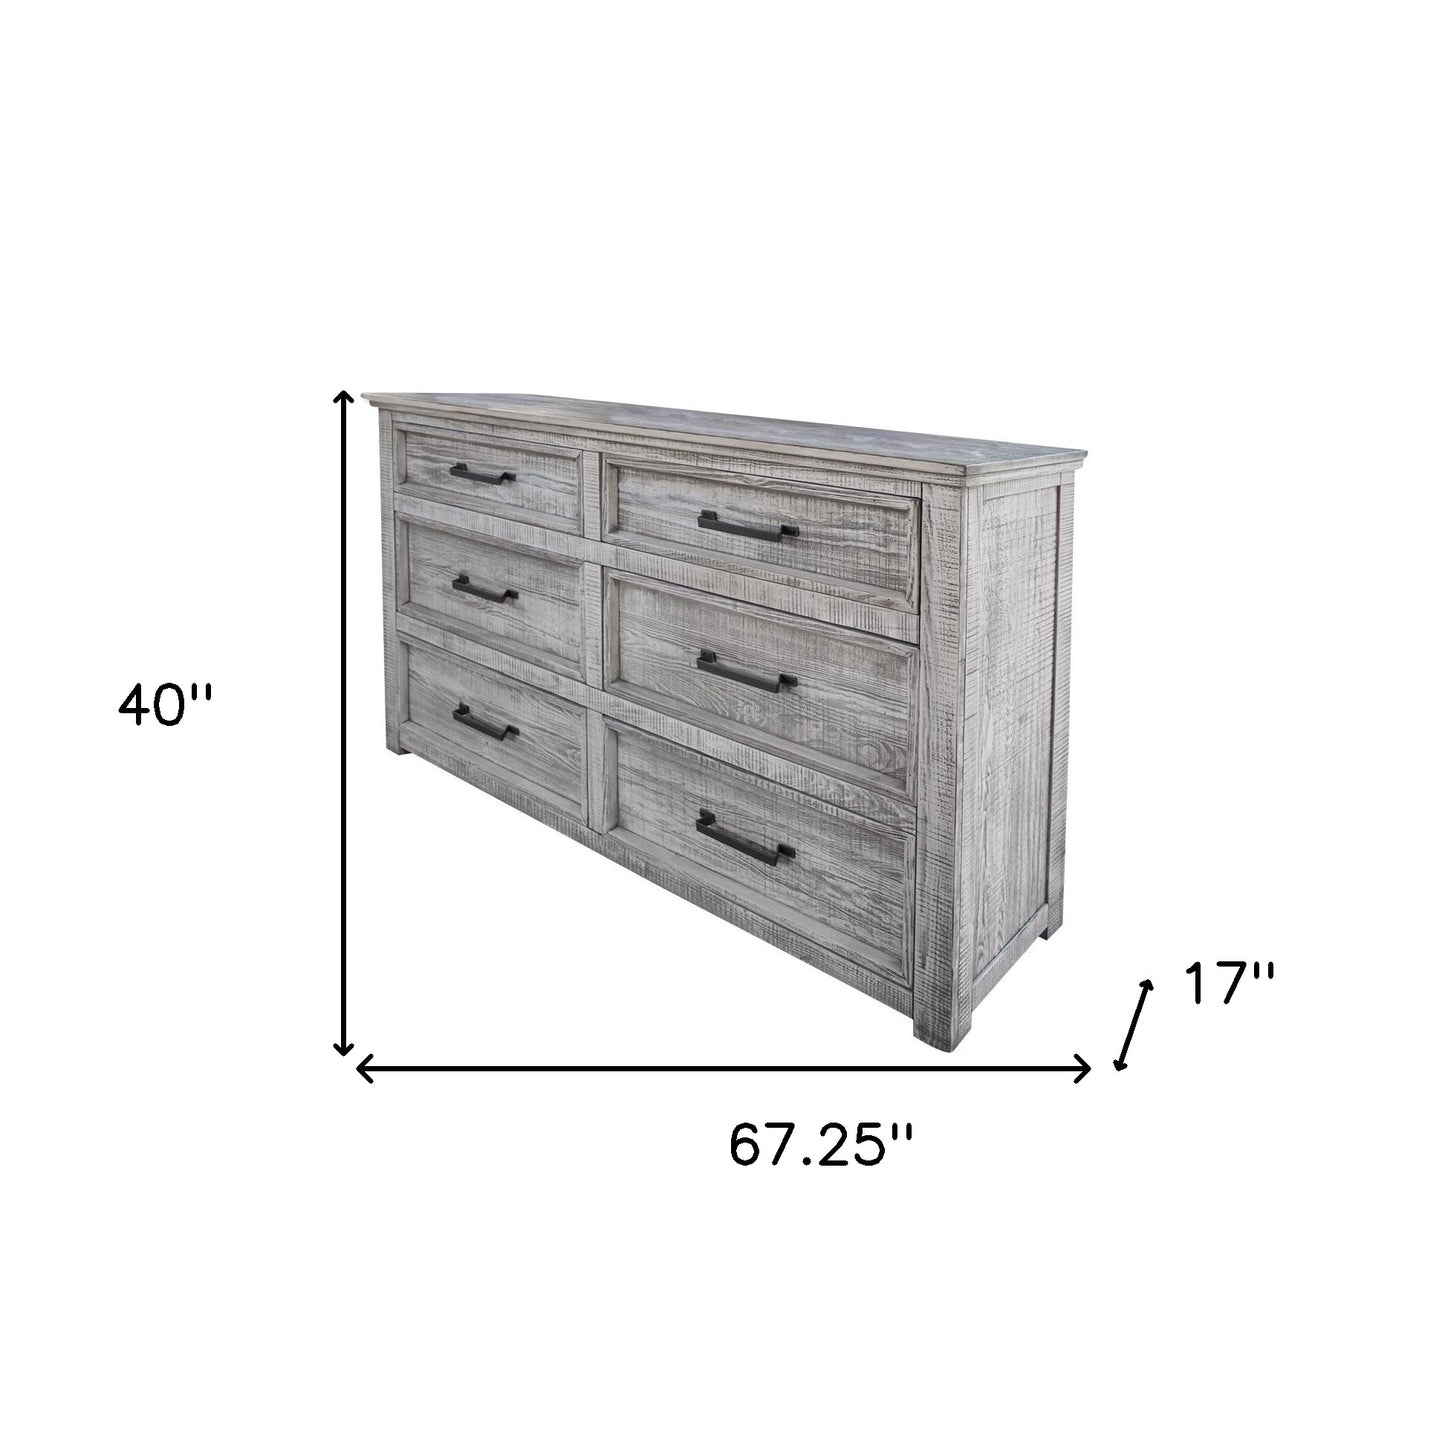 67" Gray Solid Wood Six Drawer Double Dresser